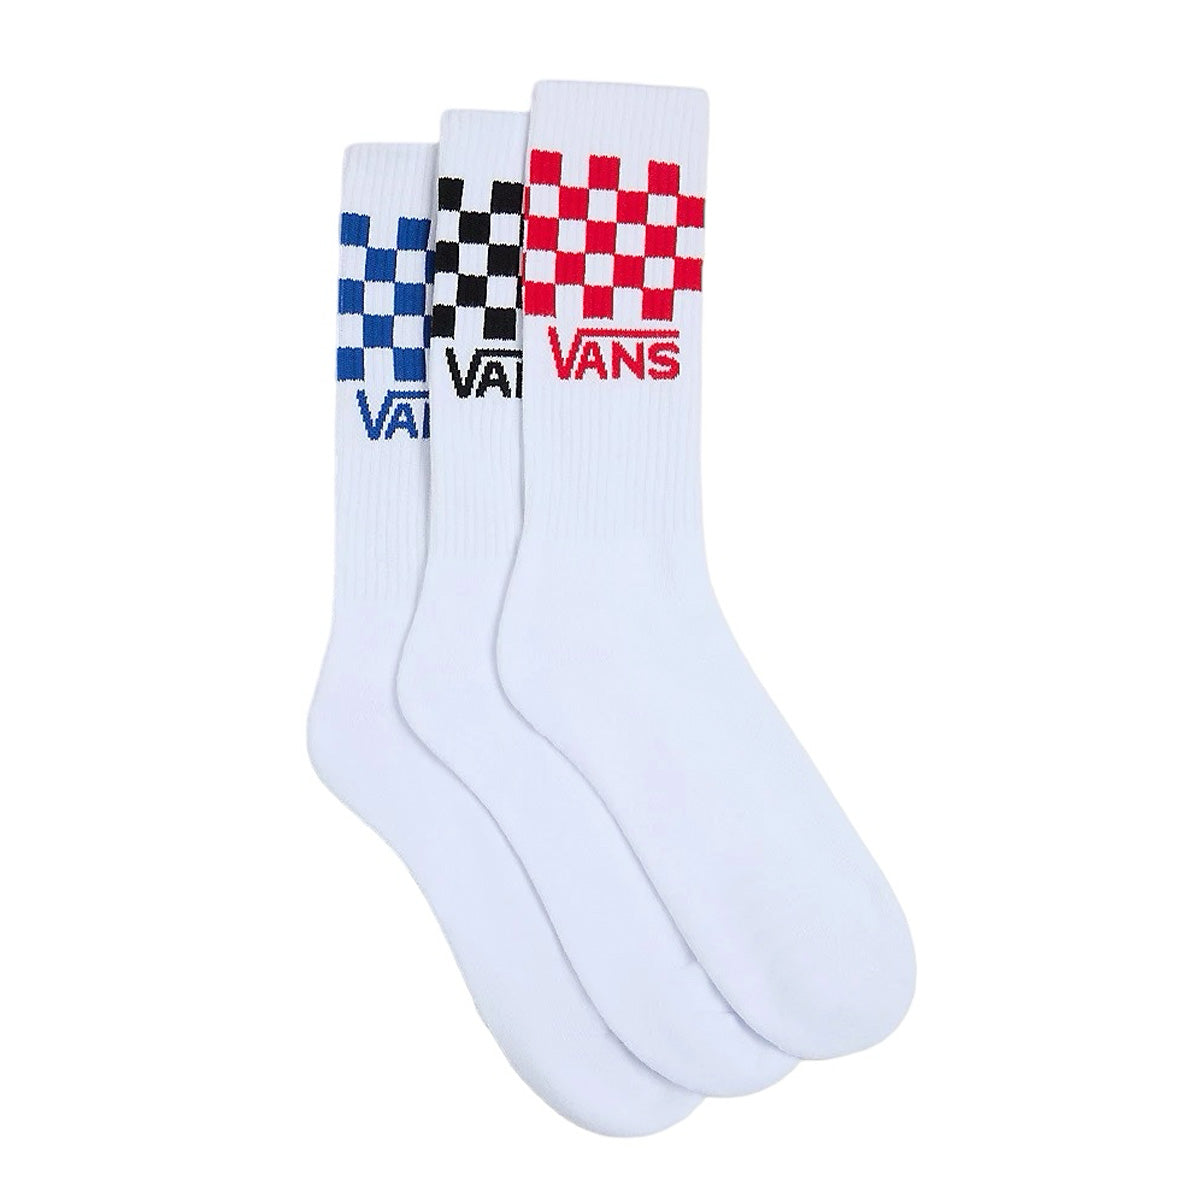 Vans classic logo crew 3 pack socks in white with red black and blue checkerboard logos. Free uk sipping over £50